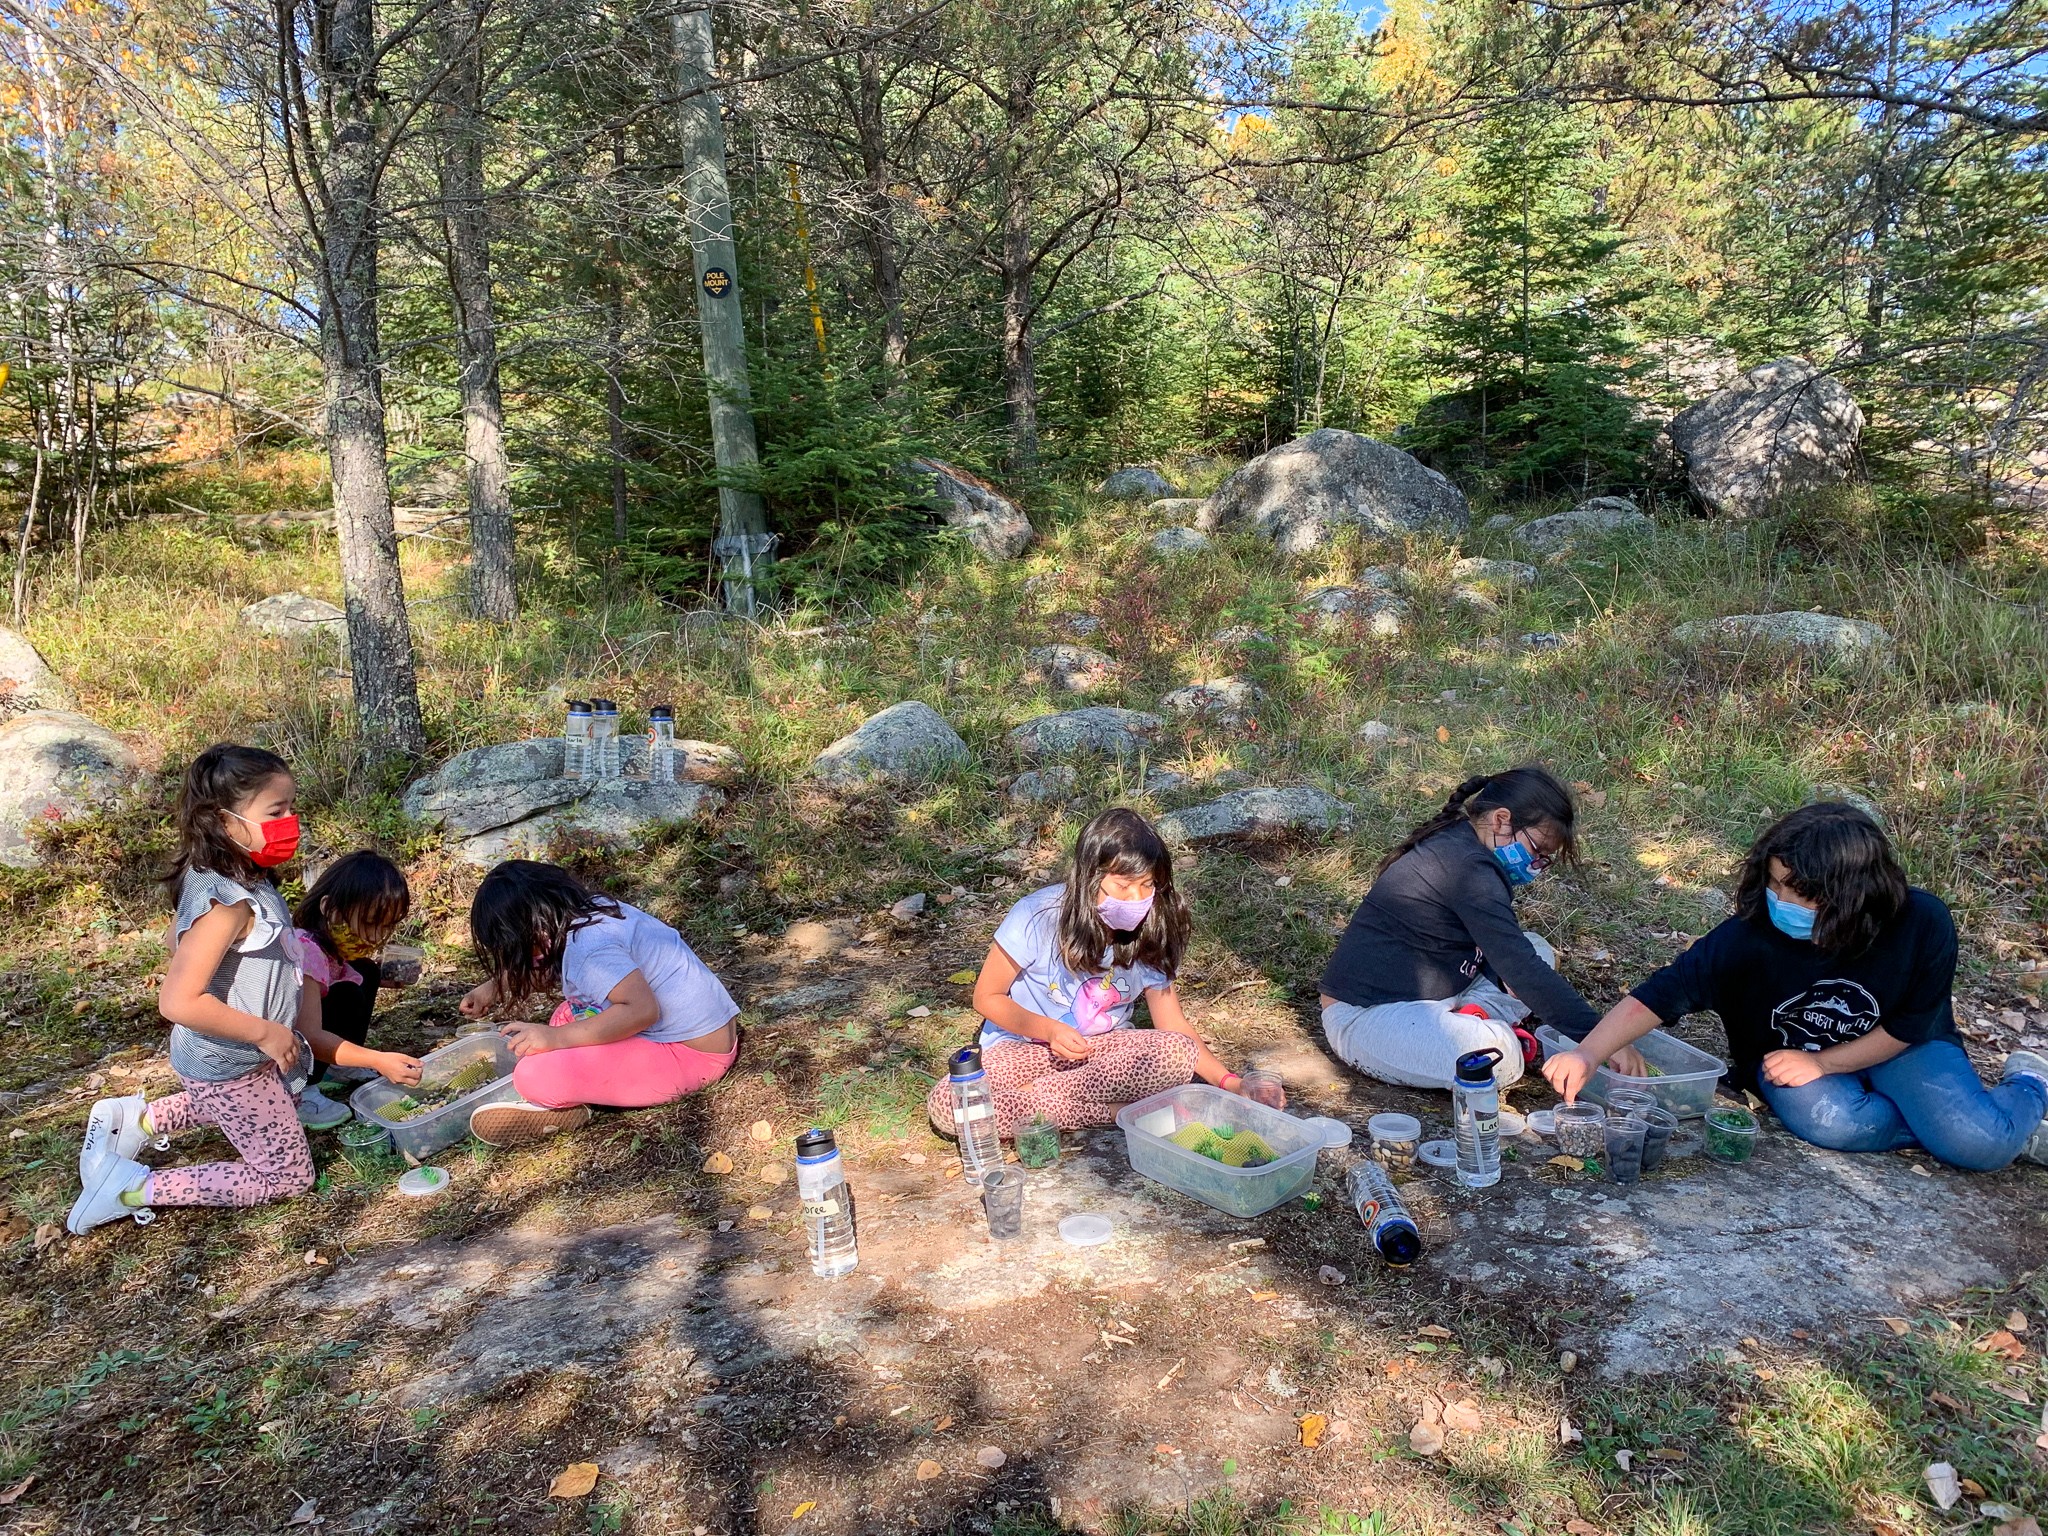 Students created miniature spawning shoals and played a game of trying to catch or eat eggs that had been placed in the miniature models in 30 seconds. The group that caught the least were the most successful in creating a safe habitat for the eggs. 